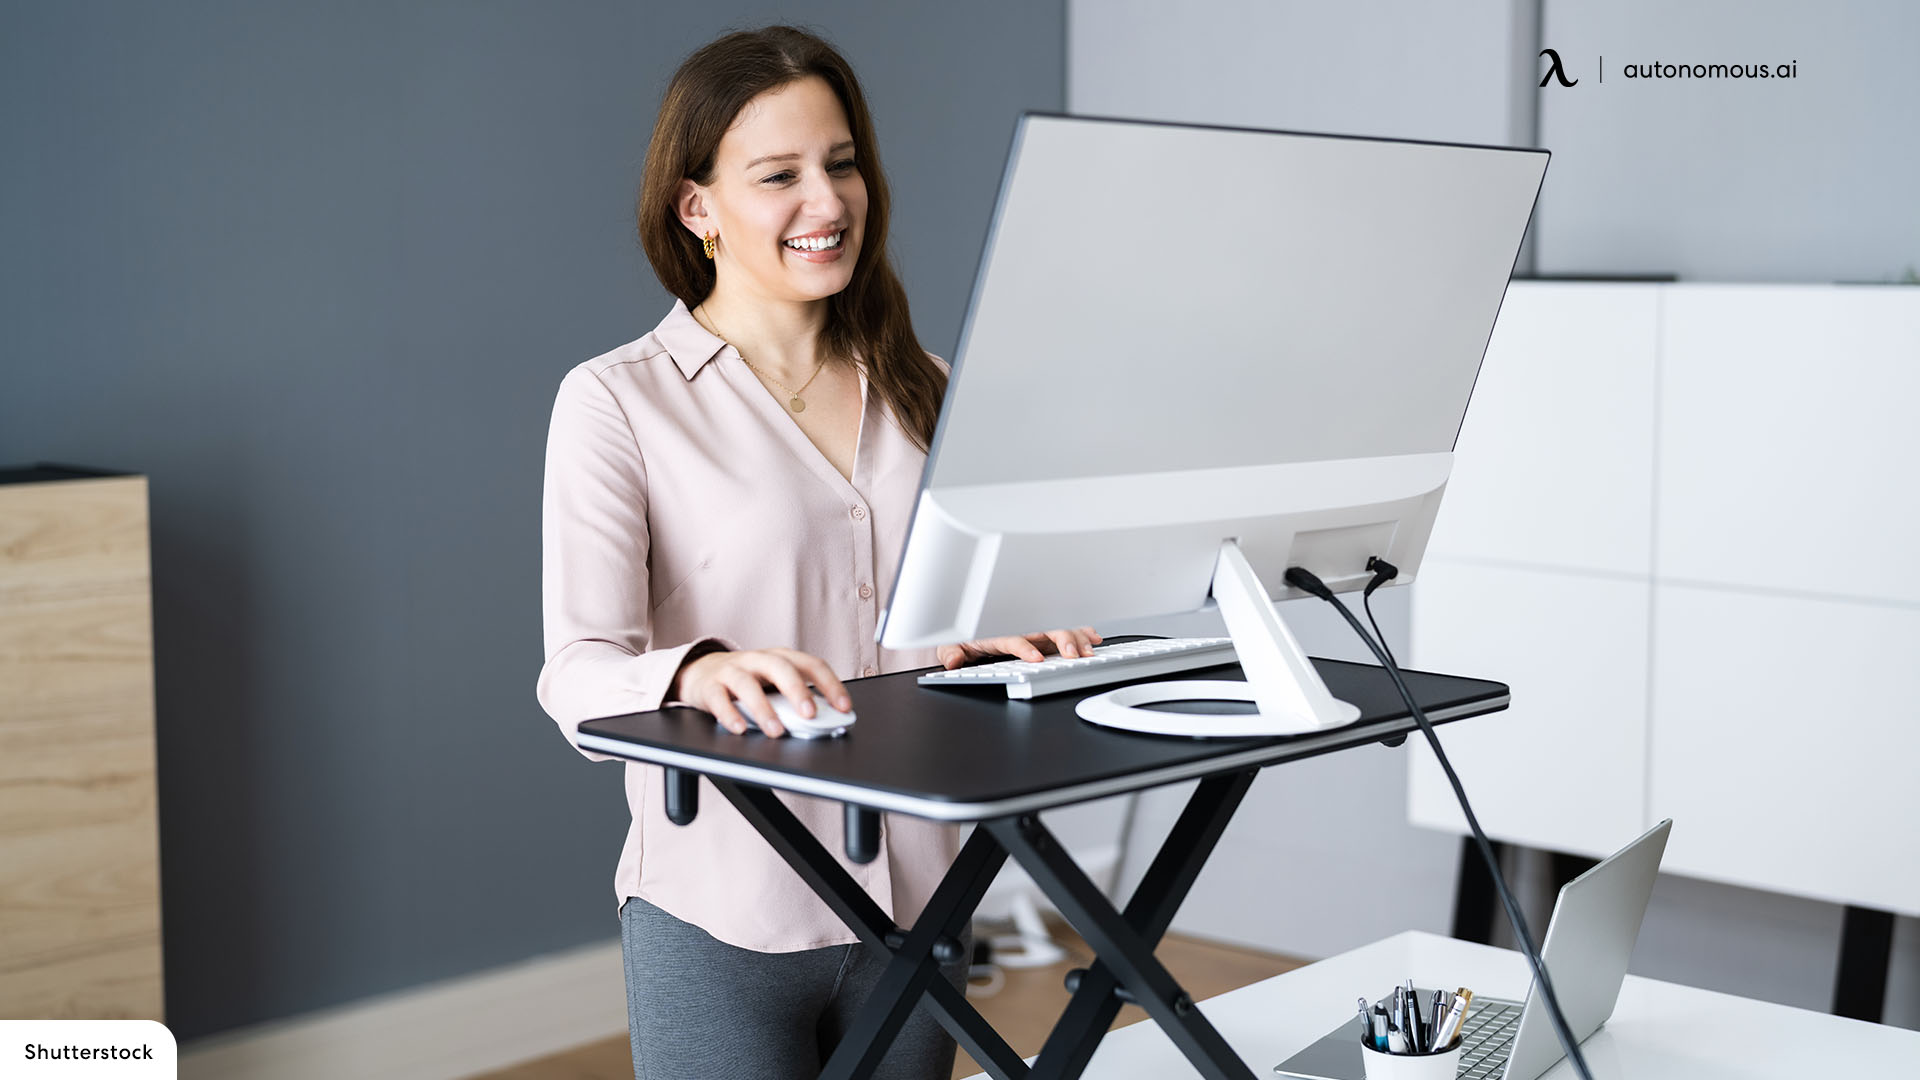 Where to Buy a Standing Desk Converter